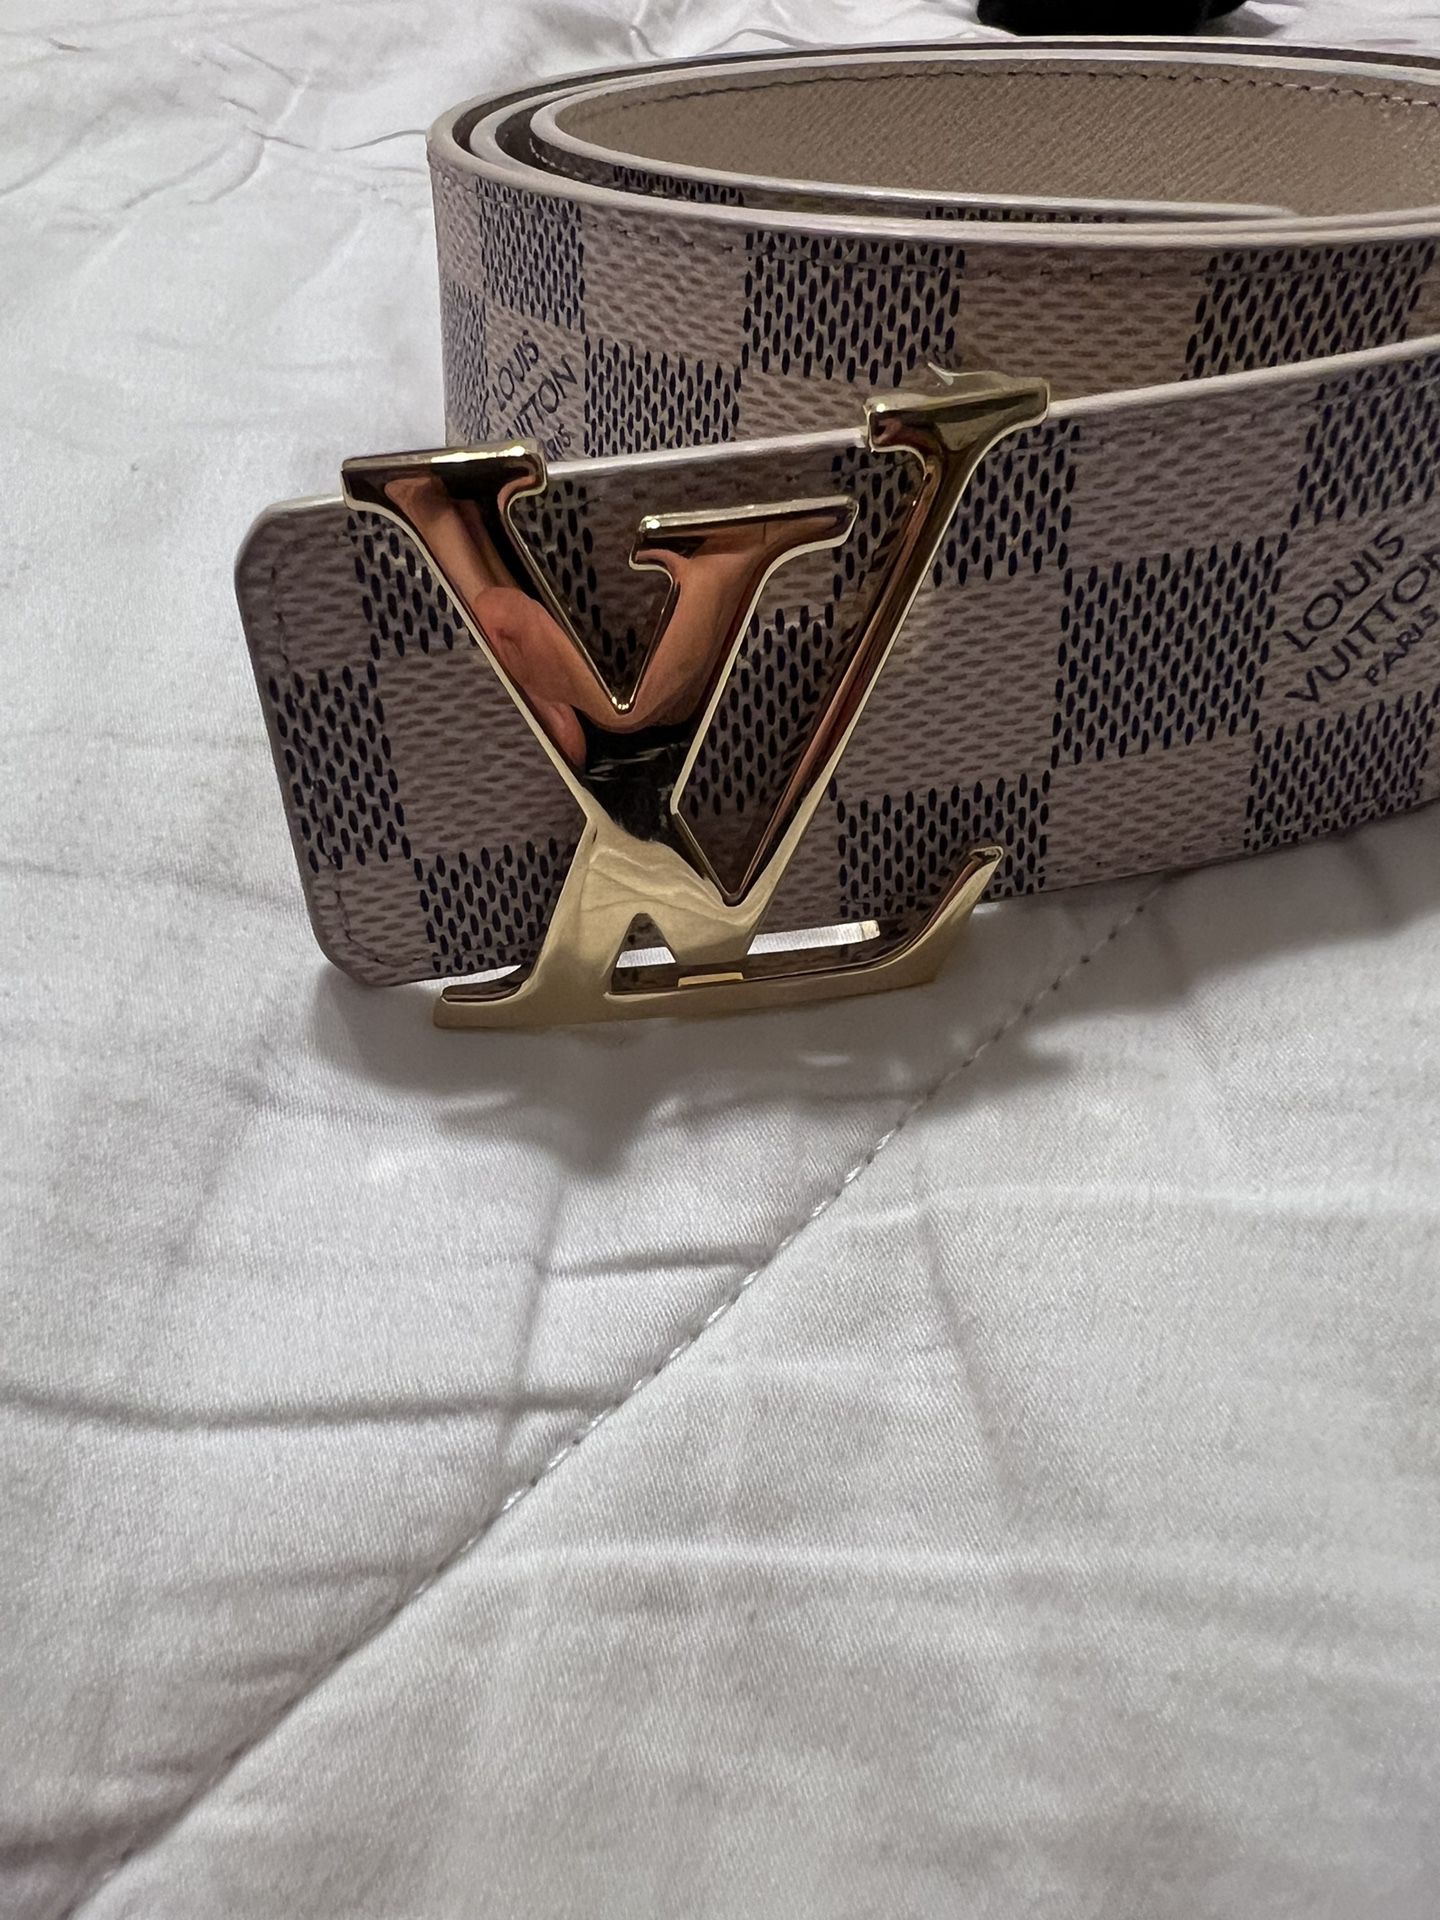 Louis Vuitton Belt . Size 32 Authentic From LV Store At Galleria